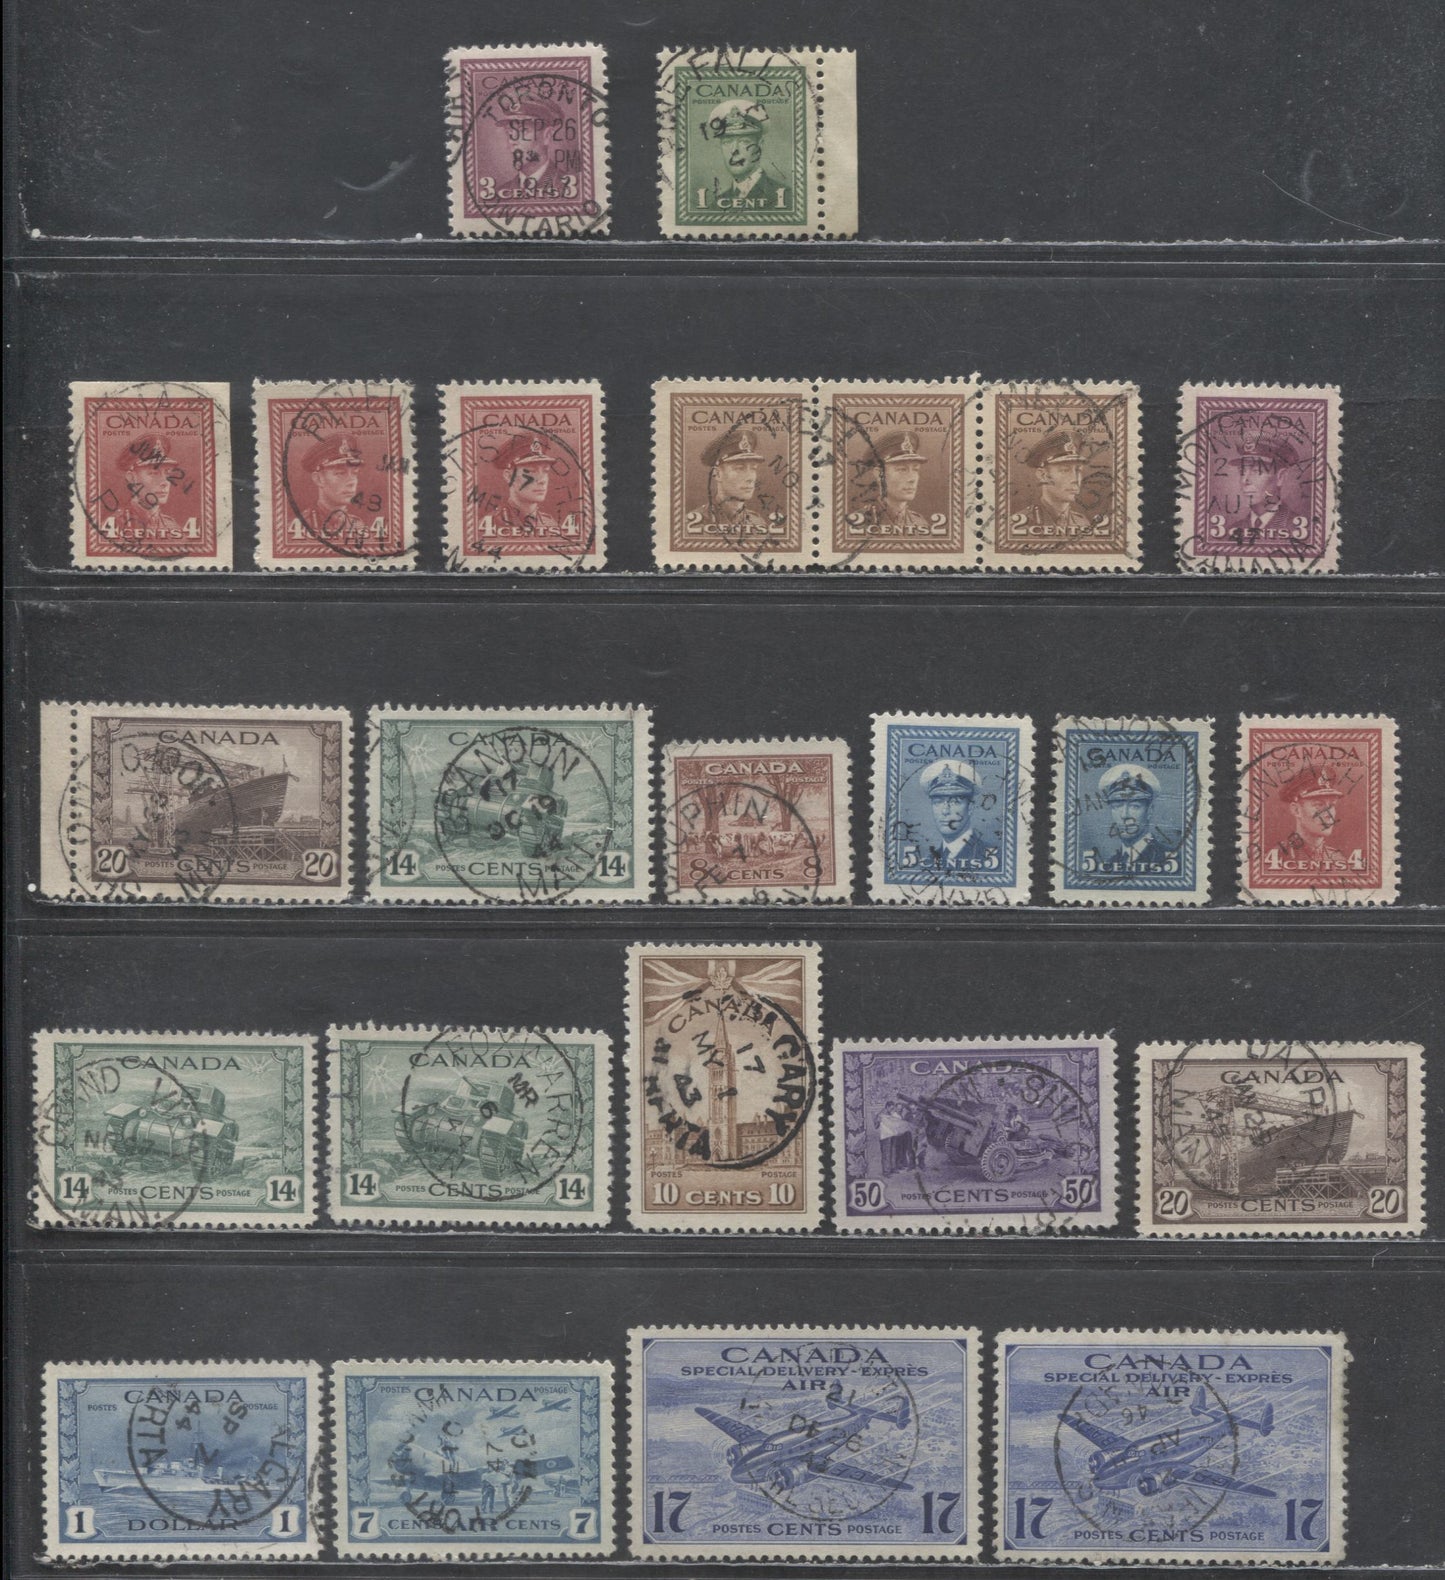 Lot 404 Canada #249-250, 252, 254-257, 259-262, C8, CE1-CE2 1c-5c, 10c, 14c-$1, 7c, 16c-17c Green - Steel Blue King George VI & Various Scenes, 1942-1949 War Effort Issue, 21 VF Used Singles, With SON Dated CDS Town Cancels & In-Period